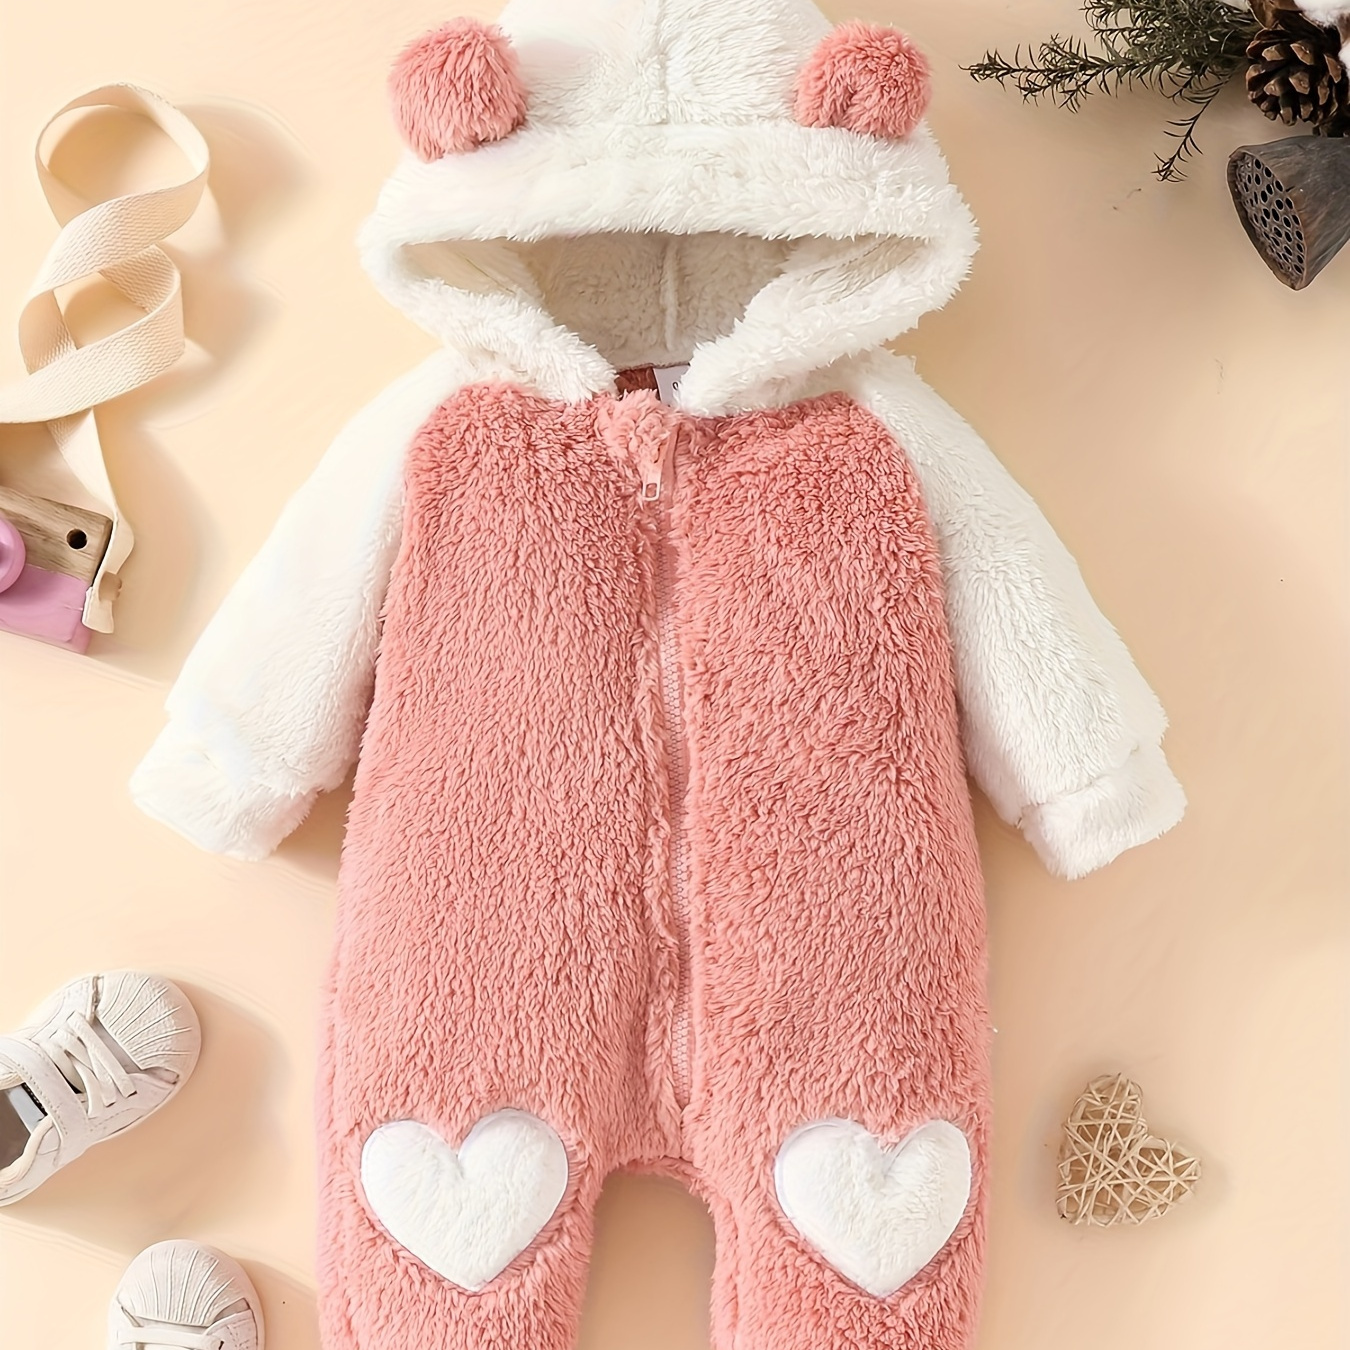 

Baby's Warm Heart Patched Ears Hooded Bodysuit, Comfy Casual Zip Up Long Sleeve Romper, Toddler & Infant Girl's Onesie For Fall Winter Everyday Wear